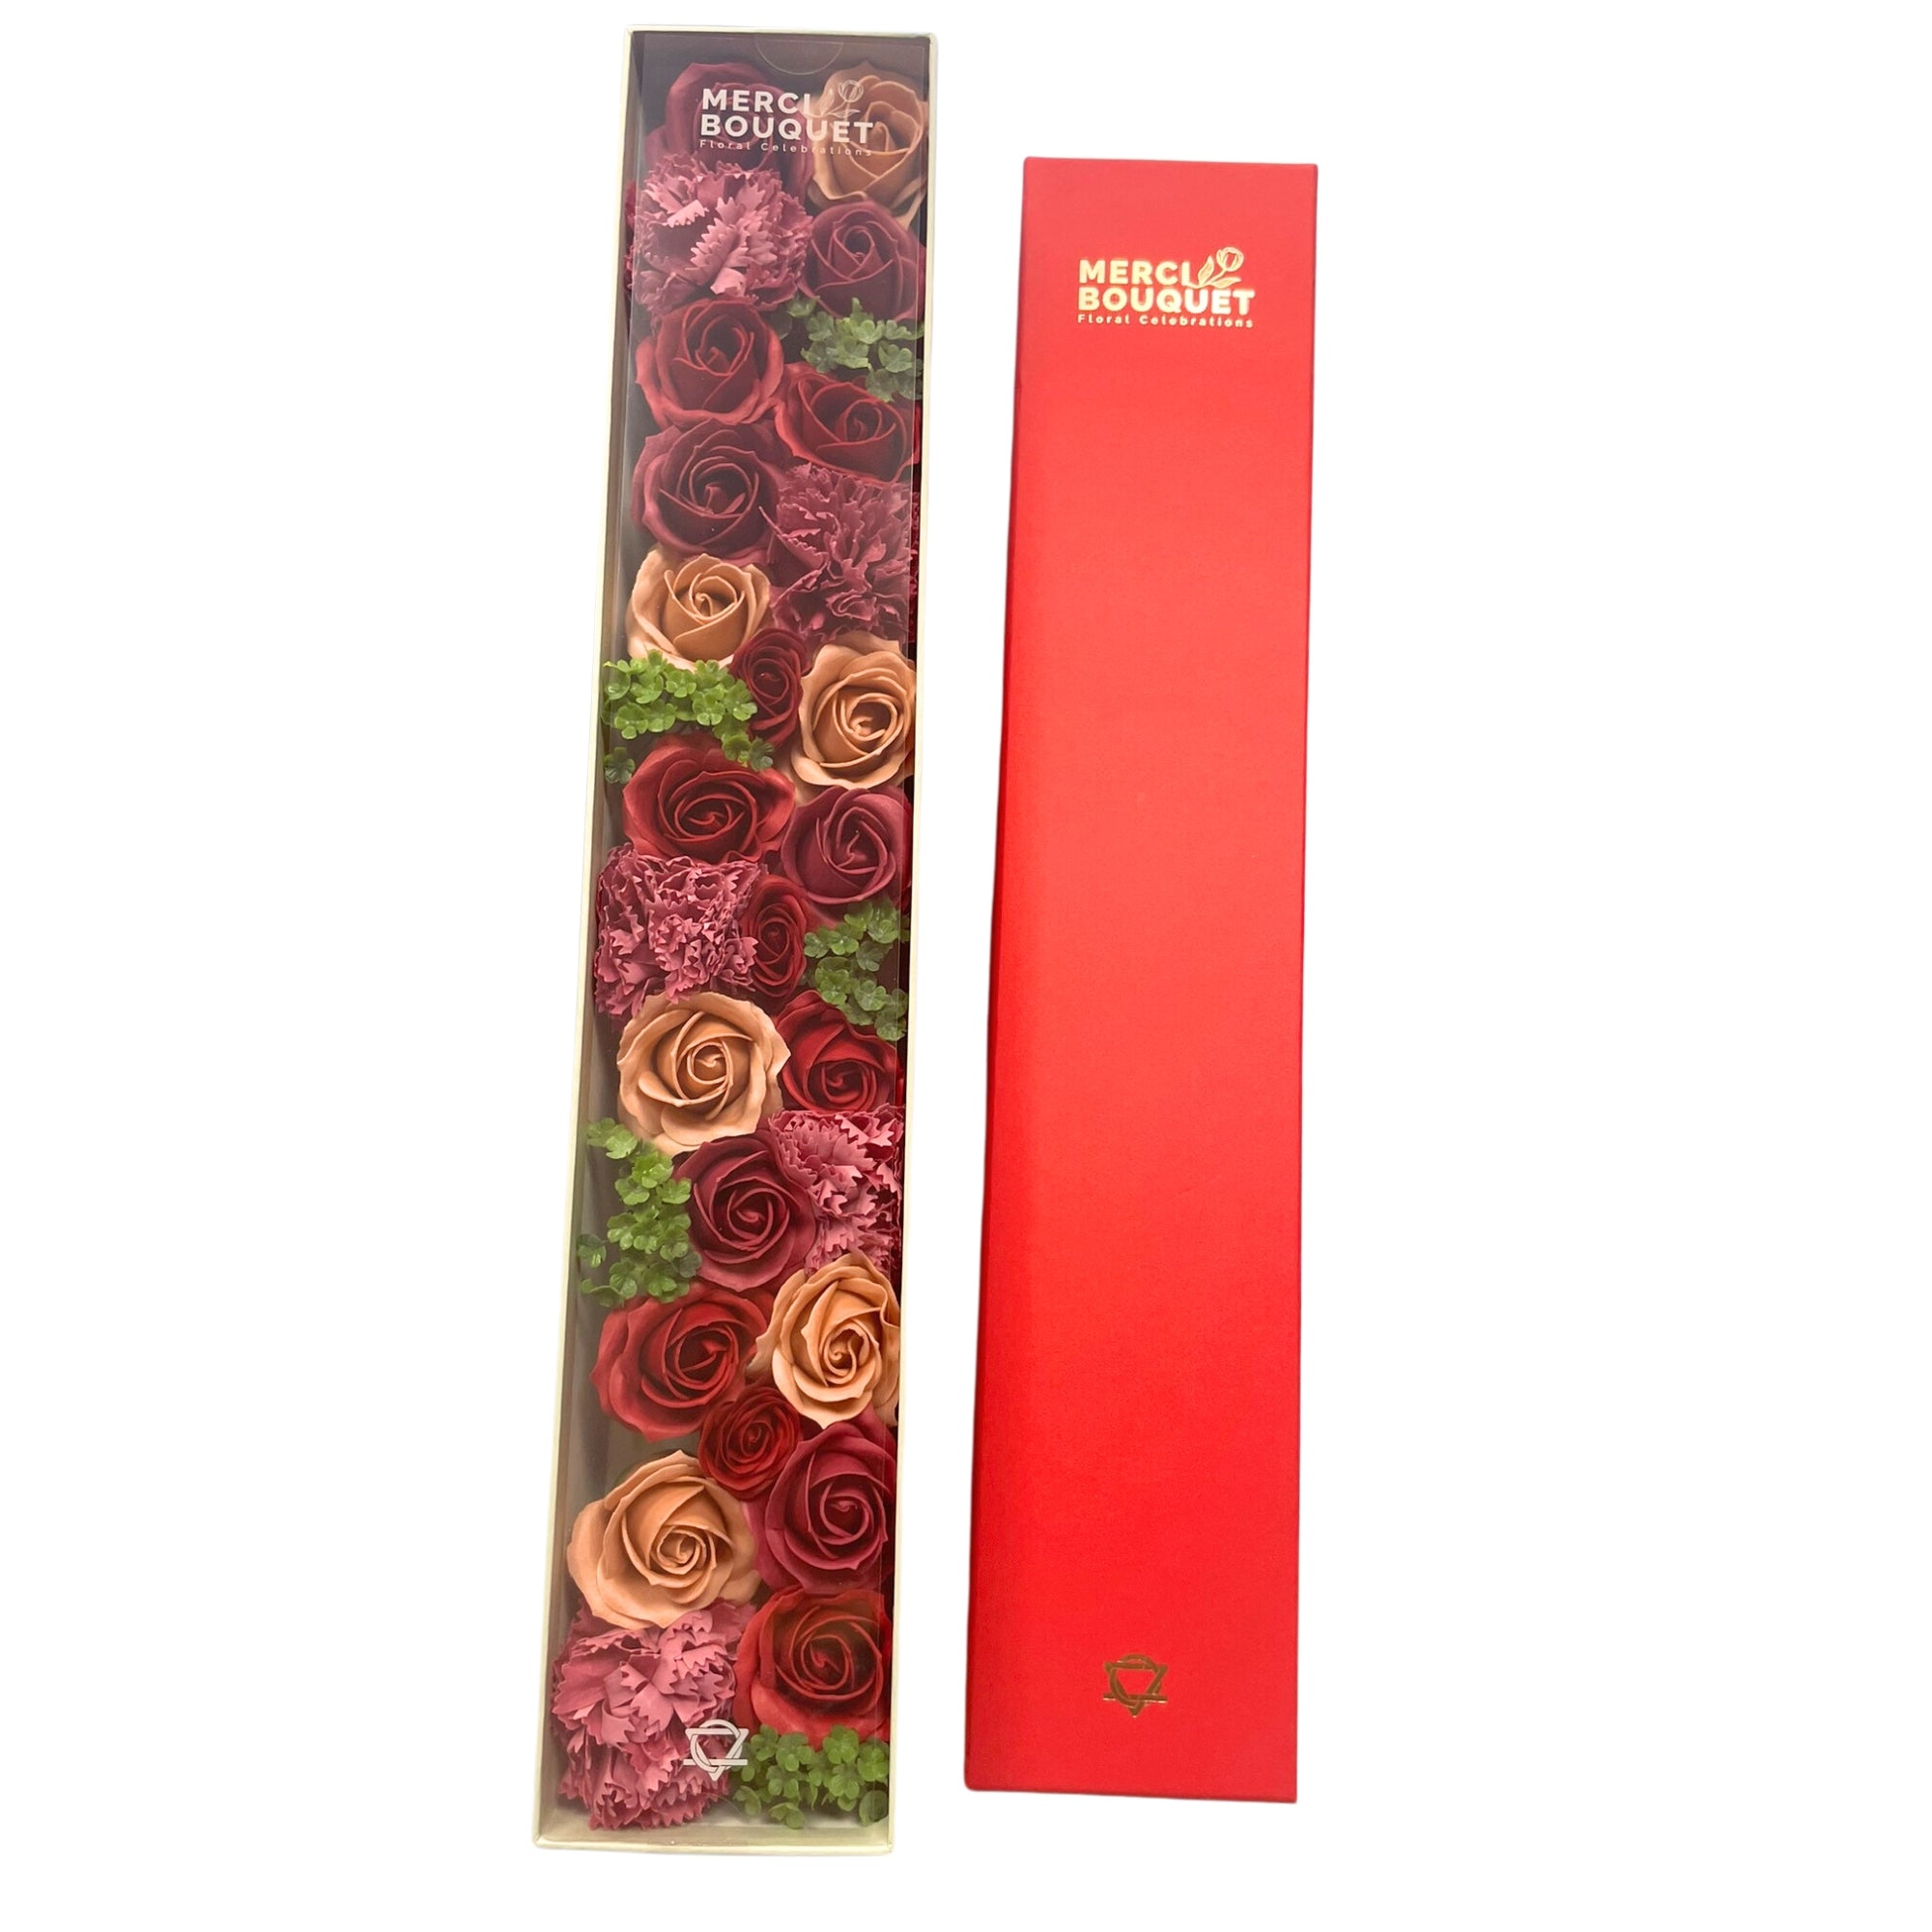 View Extra Long Box Vintage Roses information